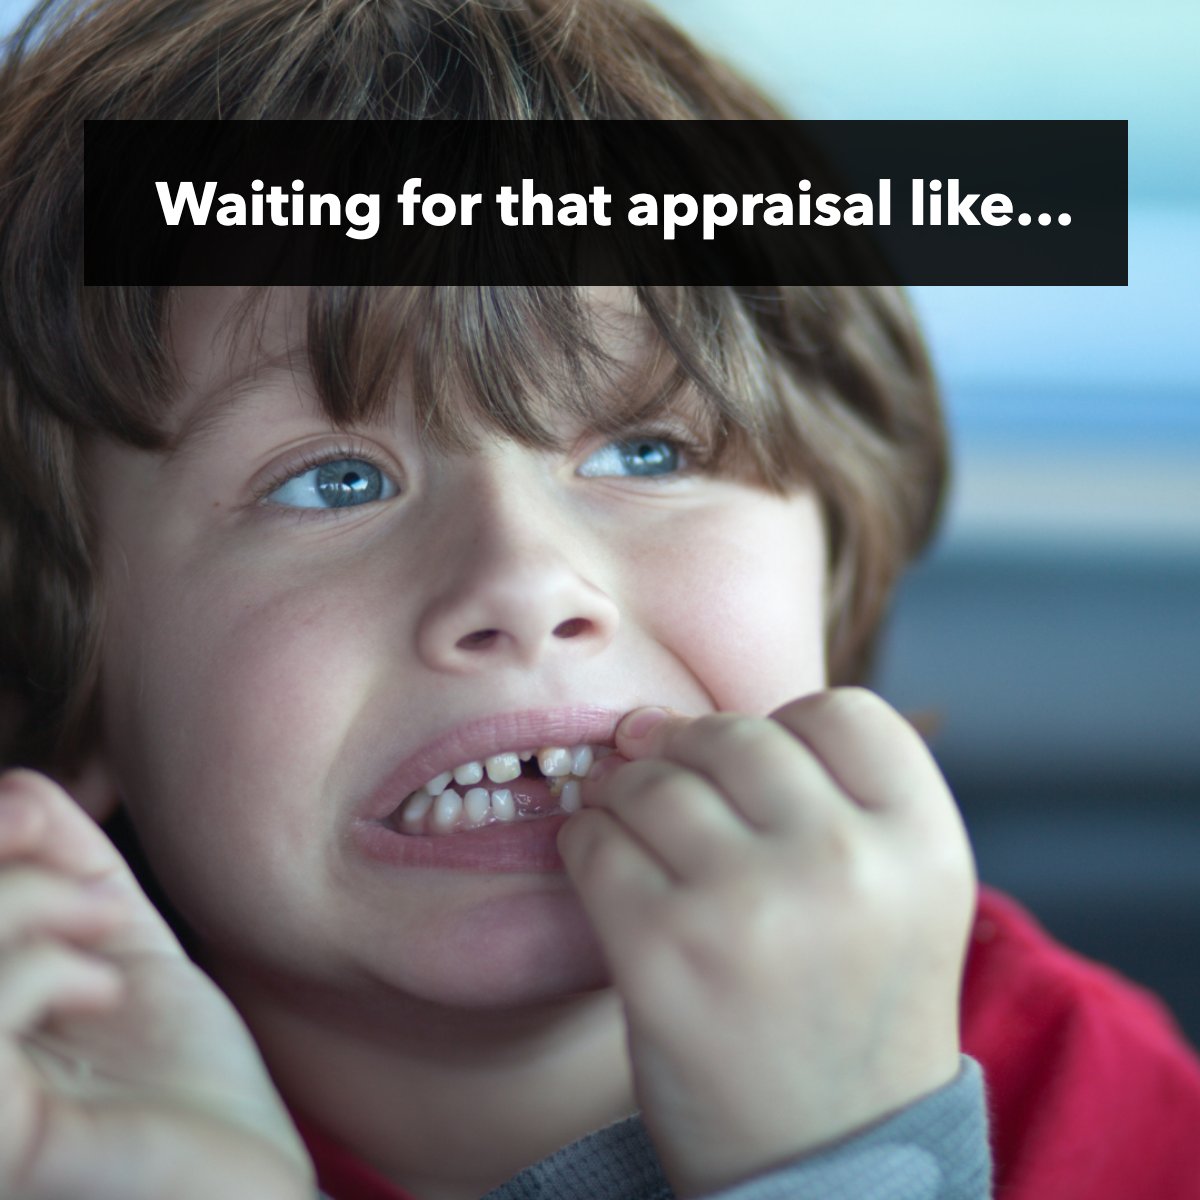 Are you familiar with that feeling? 😧 Like, how long can it take? ⏱ #appraisals #appraisaltime #realestate #realestatefact #PalmSprings #PalmDesert #CathedralCity #RanchoMirage #Luxury #RealEstate #HomeBuying #HomeSelling #Realty #Househunting